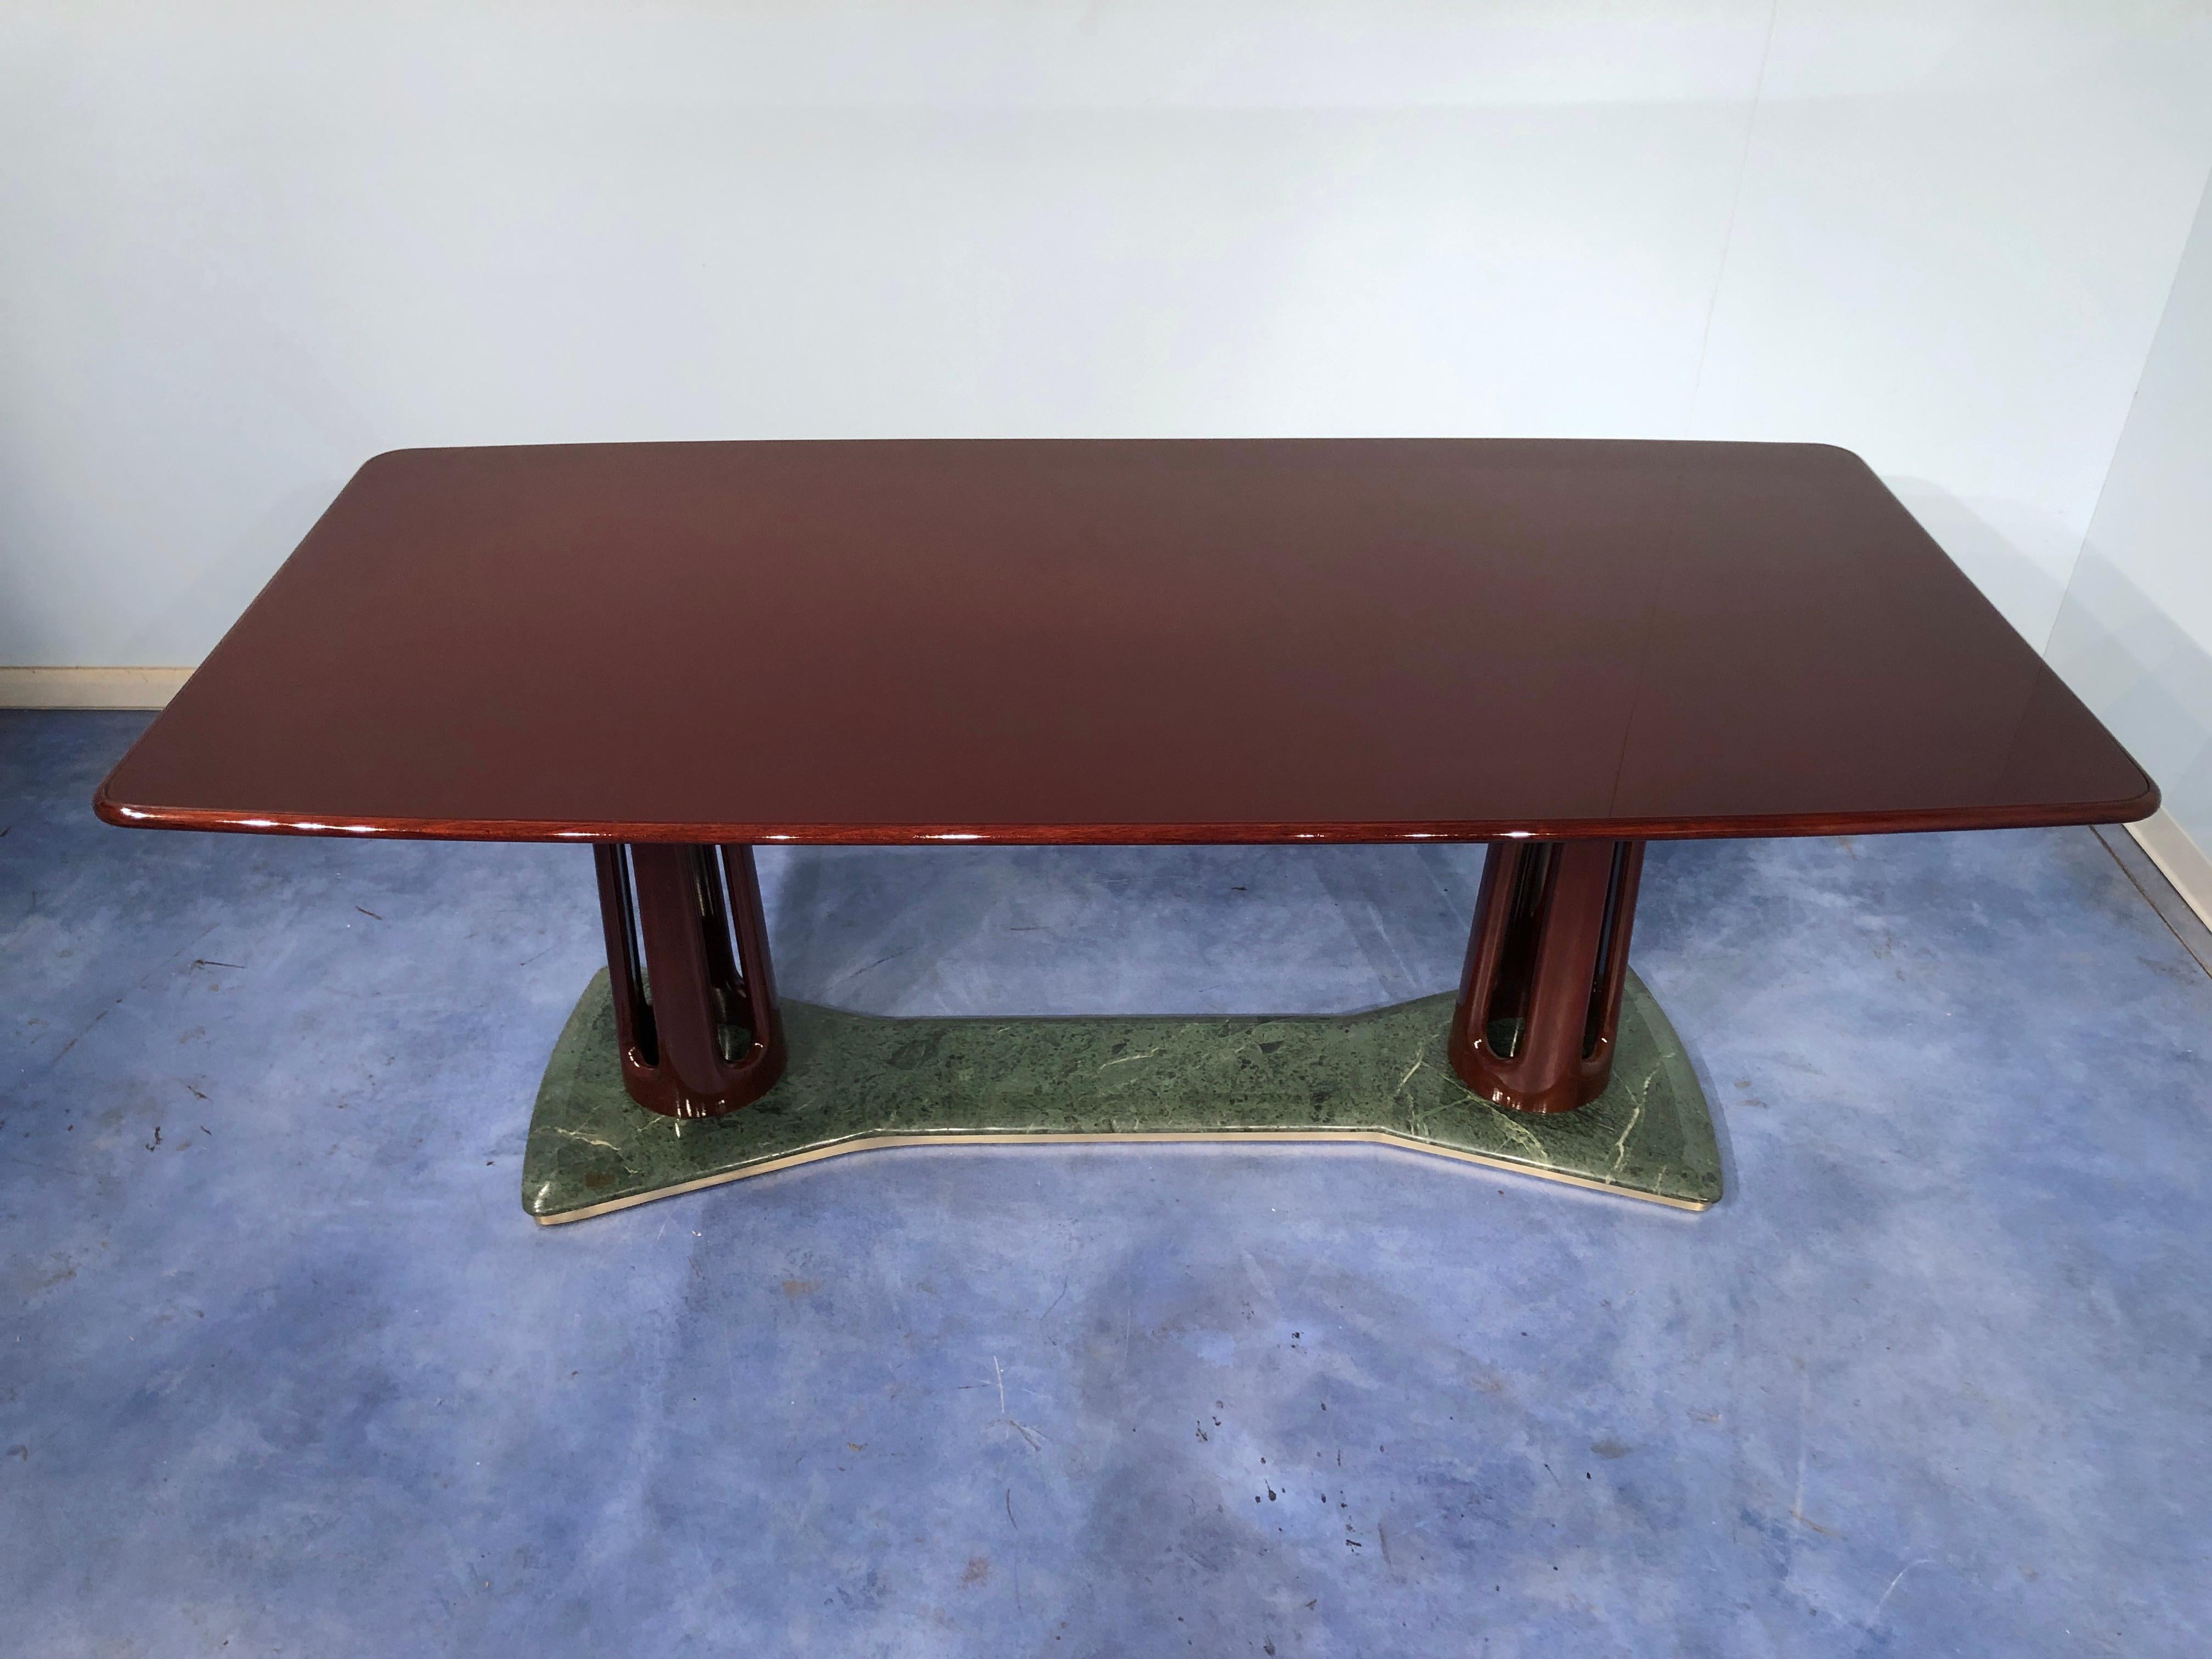 Italian Mid-Century Modern Dining Table by Vittorio Dassi, 1950s For Sale 4